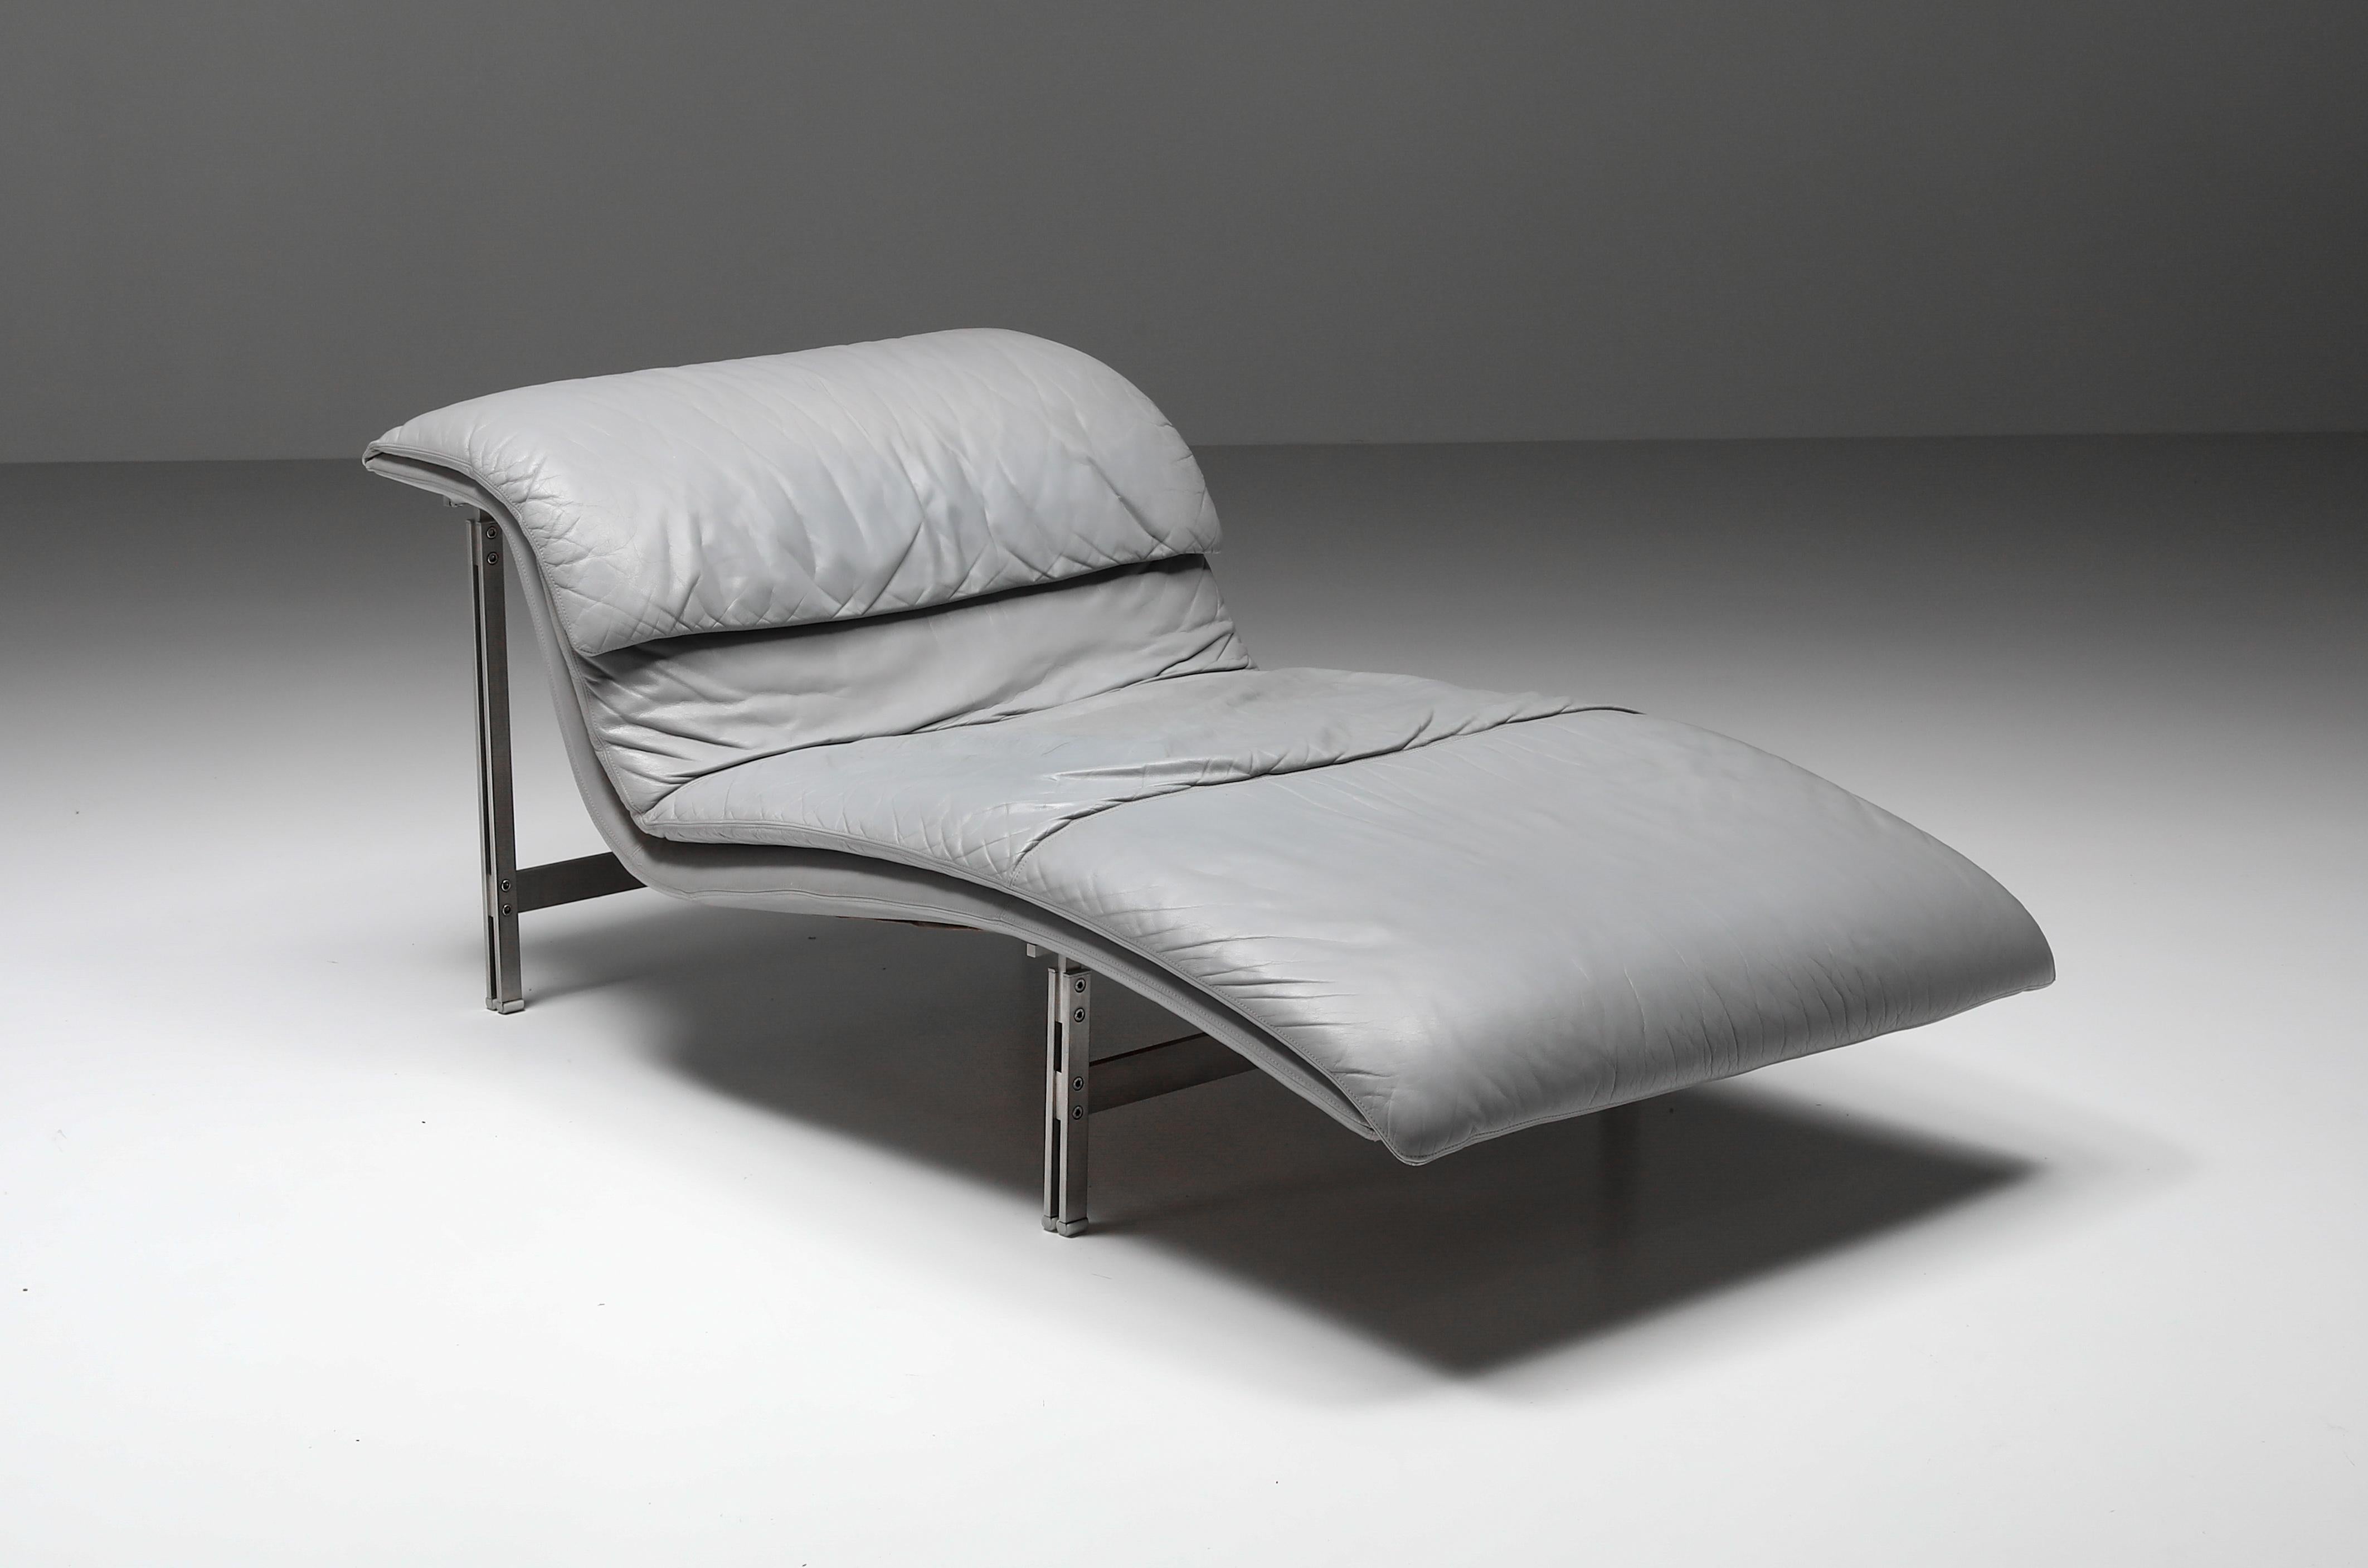 Postmodern; chaise lounge; Giovanni Offredi; Saporiti; Italy; 1974; Italian design.

'The Wave' lounge chair designed in 1974 by Mr. Giovanni Offredi, is still one of the “classics” of the Saporiti Italia collection. Visible steel frame,